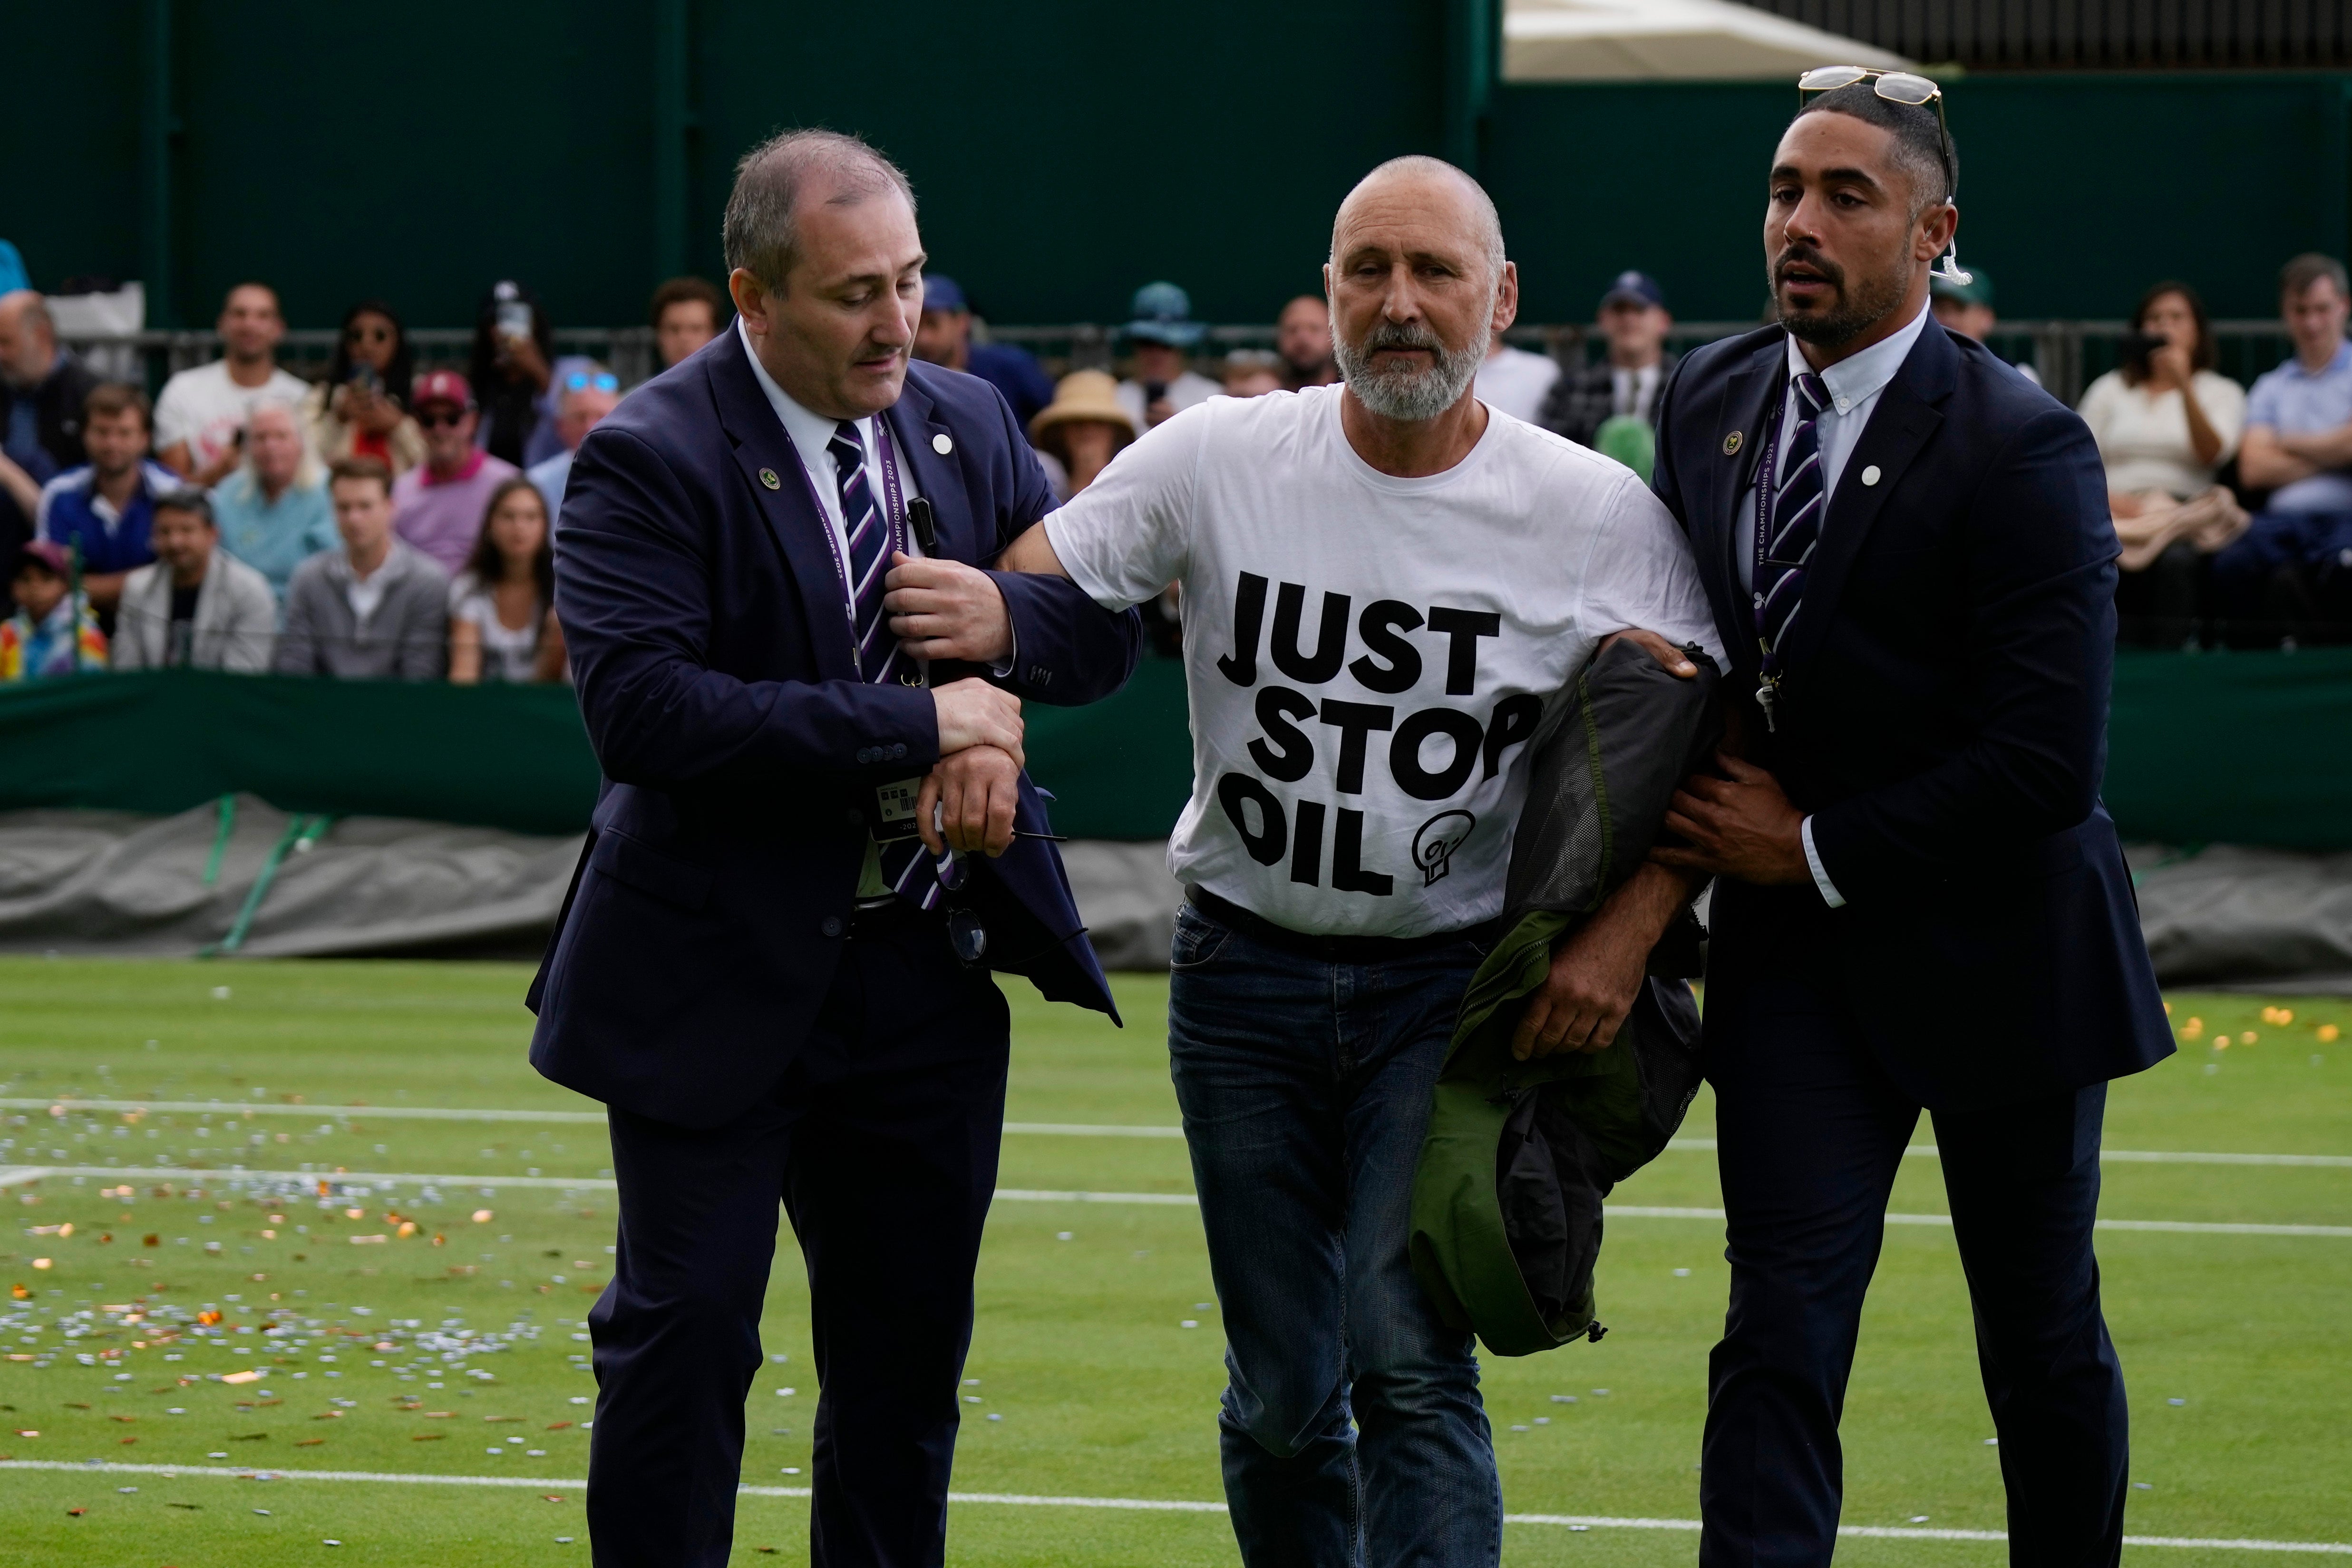 A Just Stop Oil protester is removed from Court 18 on day three of the Wimbledon tennis championships